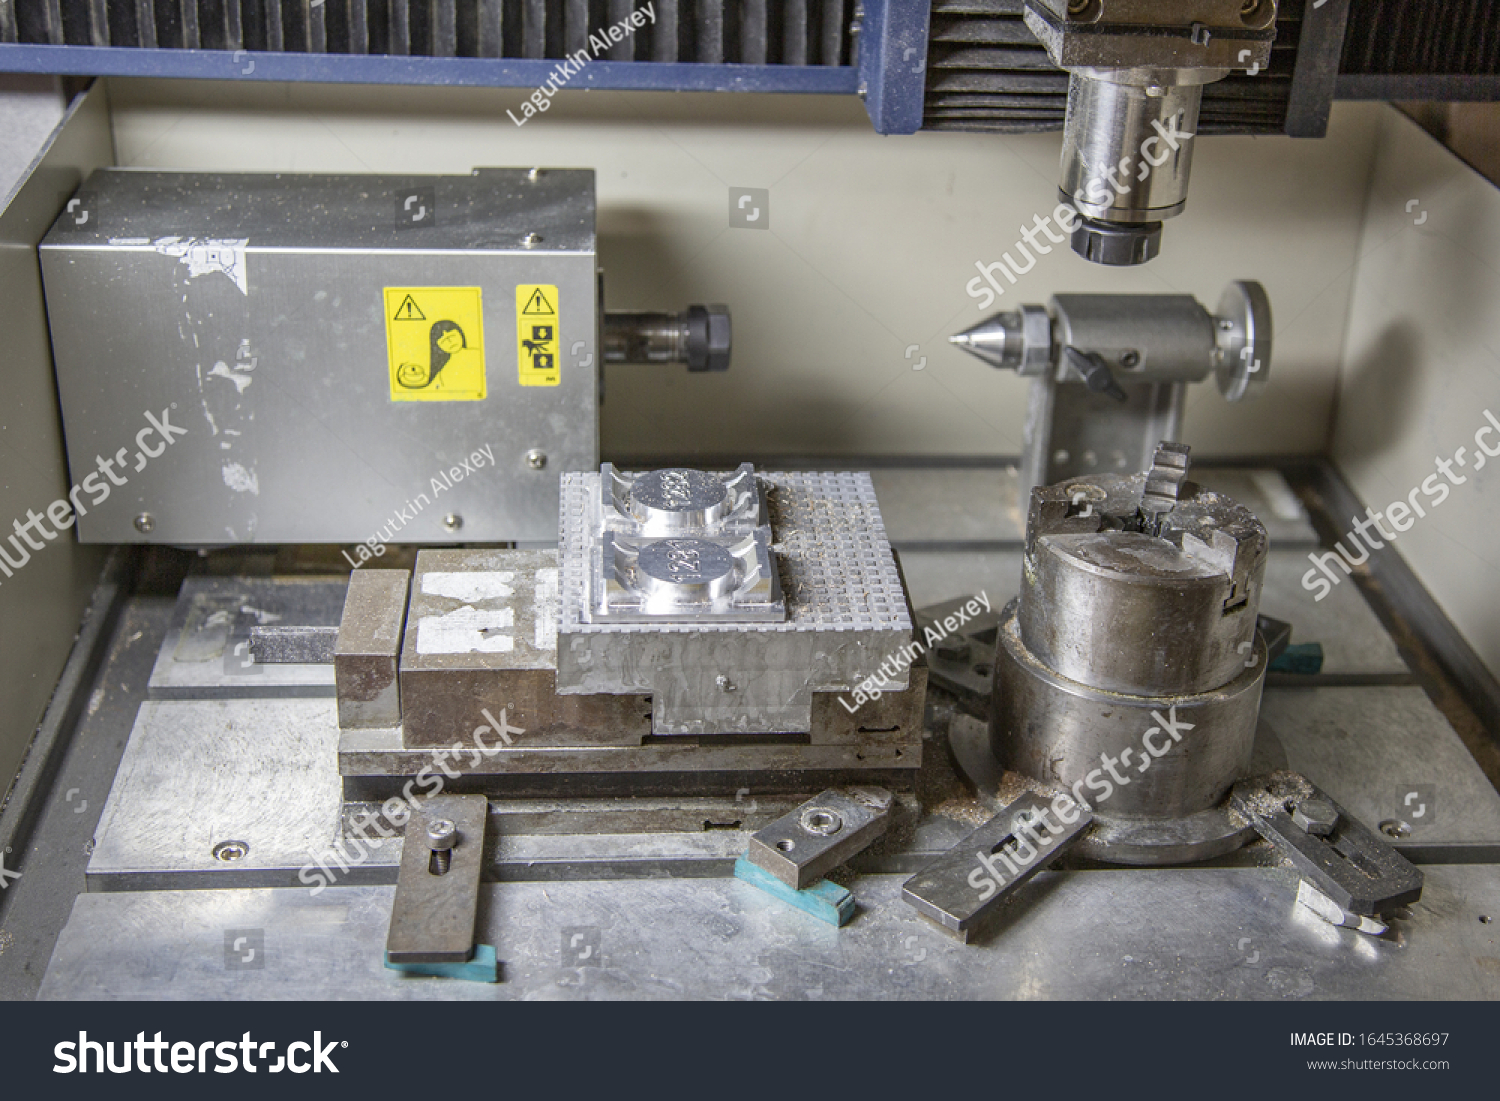 stock-photo-moscow-russia-february-industrial-workshop-of-the-watch-factory-nika-manufacture-of-1645368697.jpg